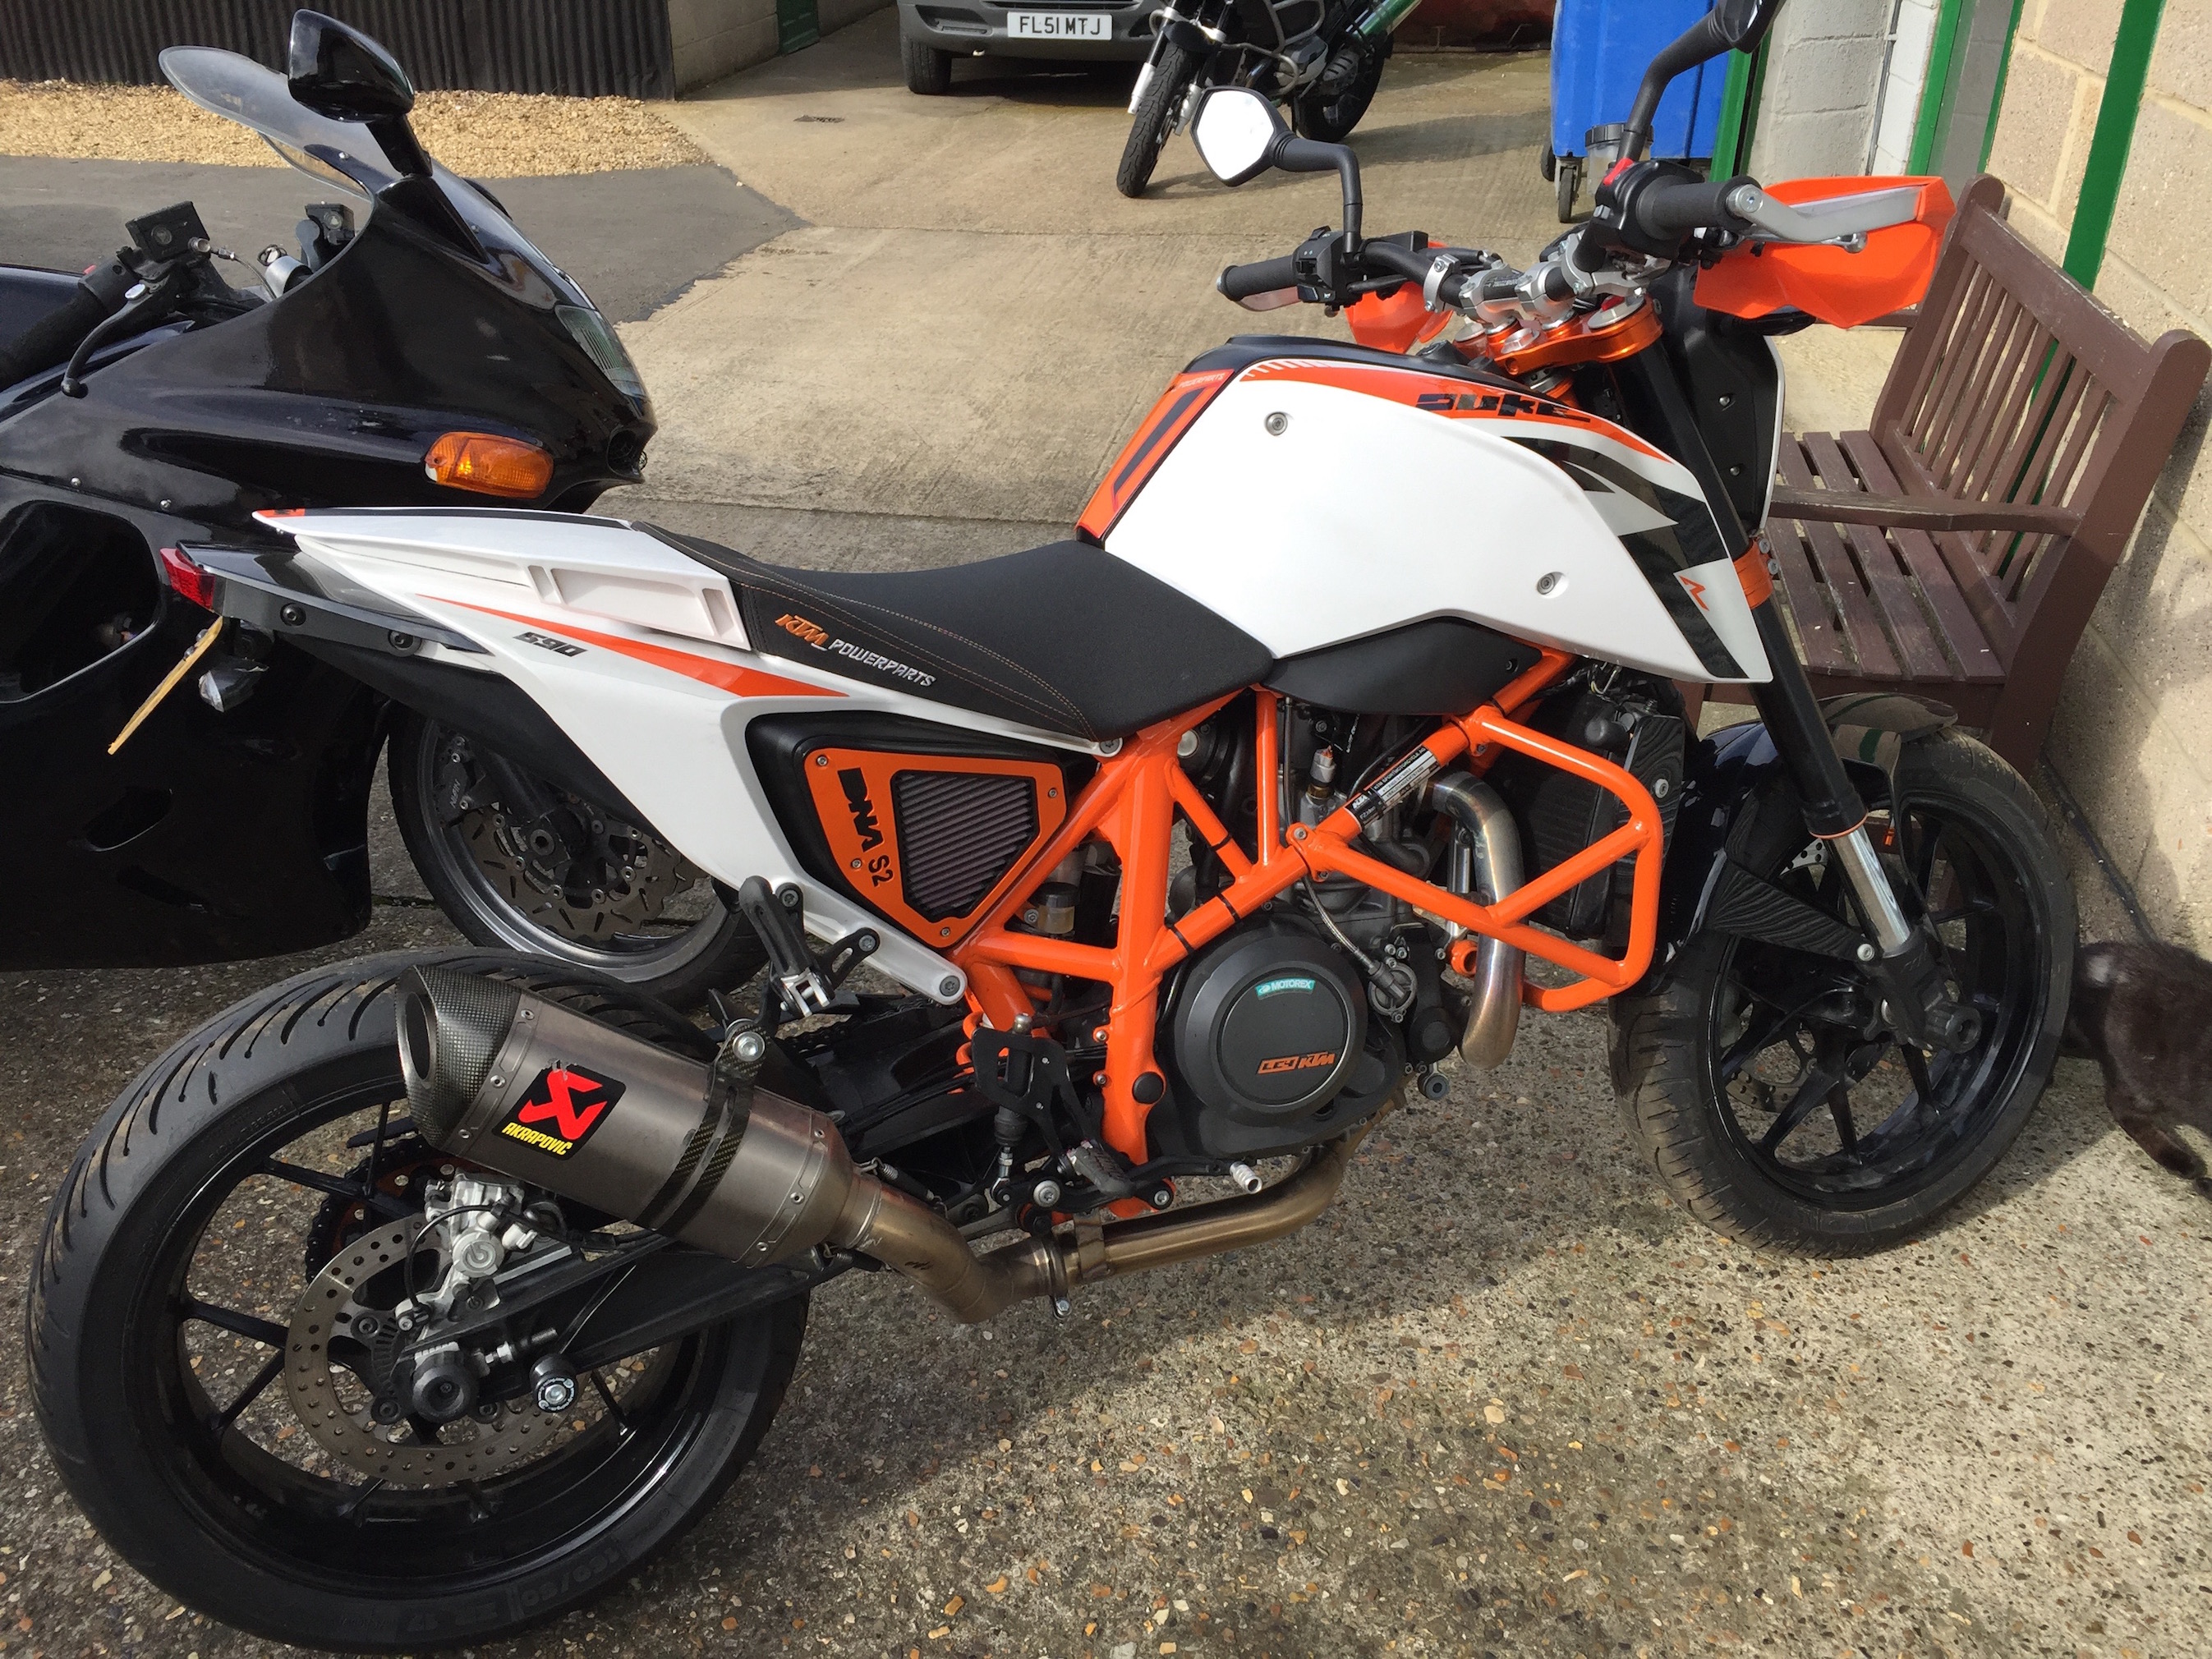 KTM Duke 690 race cam fit and ECU remap – 70bhp at the rear wheel and smooth as silk…